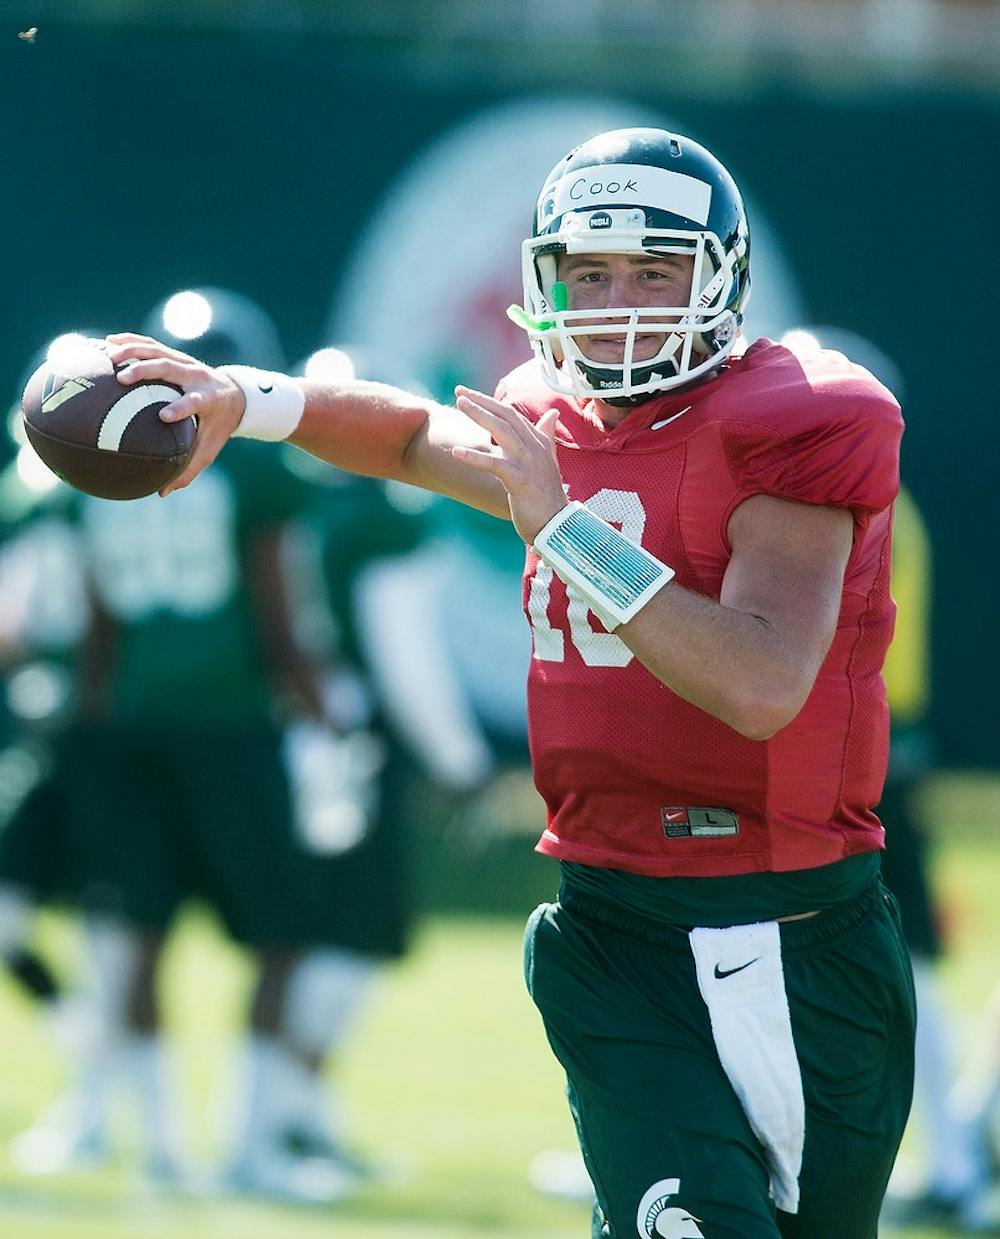 <p>Junior quarterback Connor Cook looks to throw the ball during practice on Aug. 14, 2014, at the practice field outside of Duffy Daugherty Football Building. The season kicks off Aug. 29, with a game against Jacksonville State. Danyelle Morrow/The State News</p>